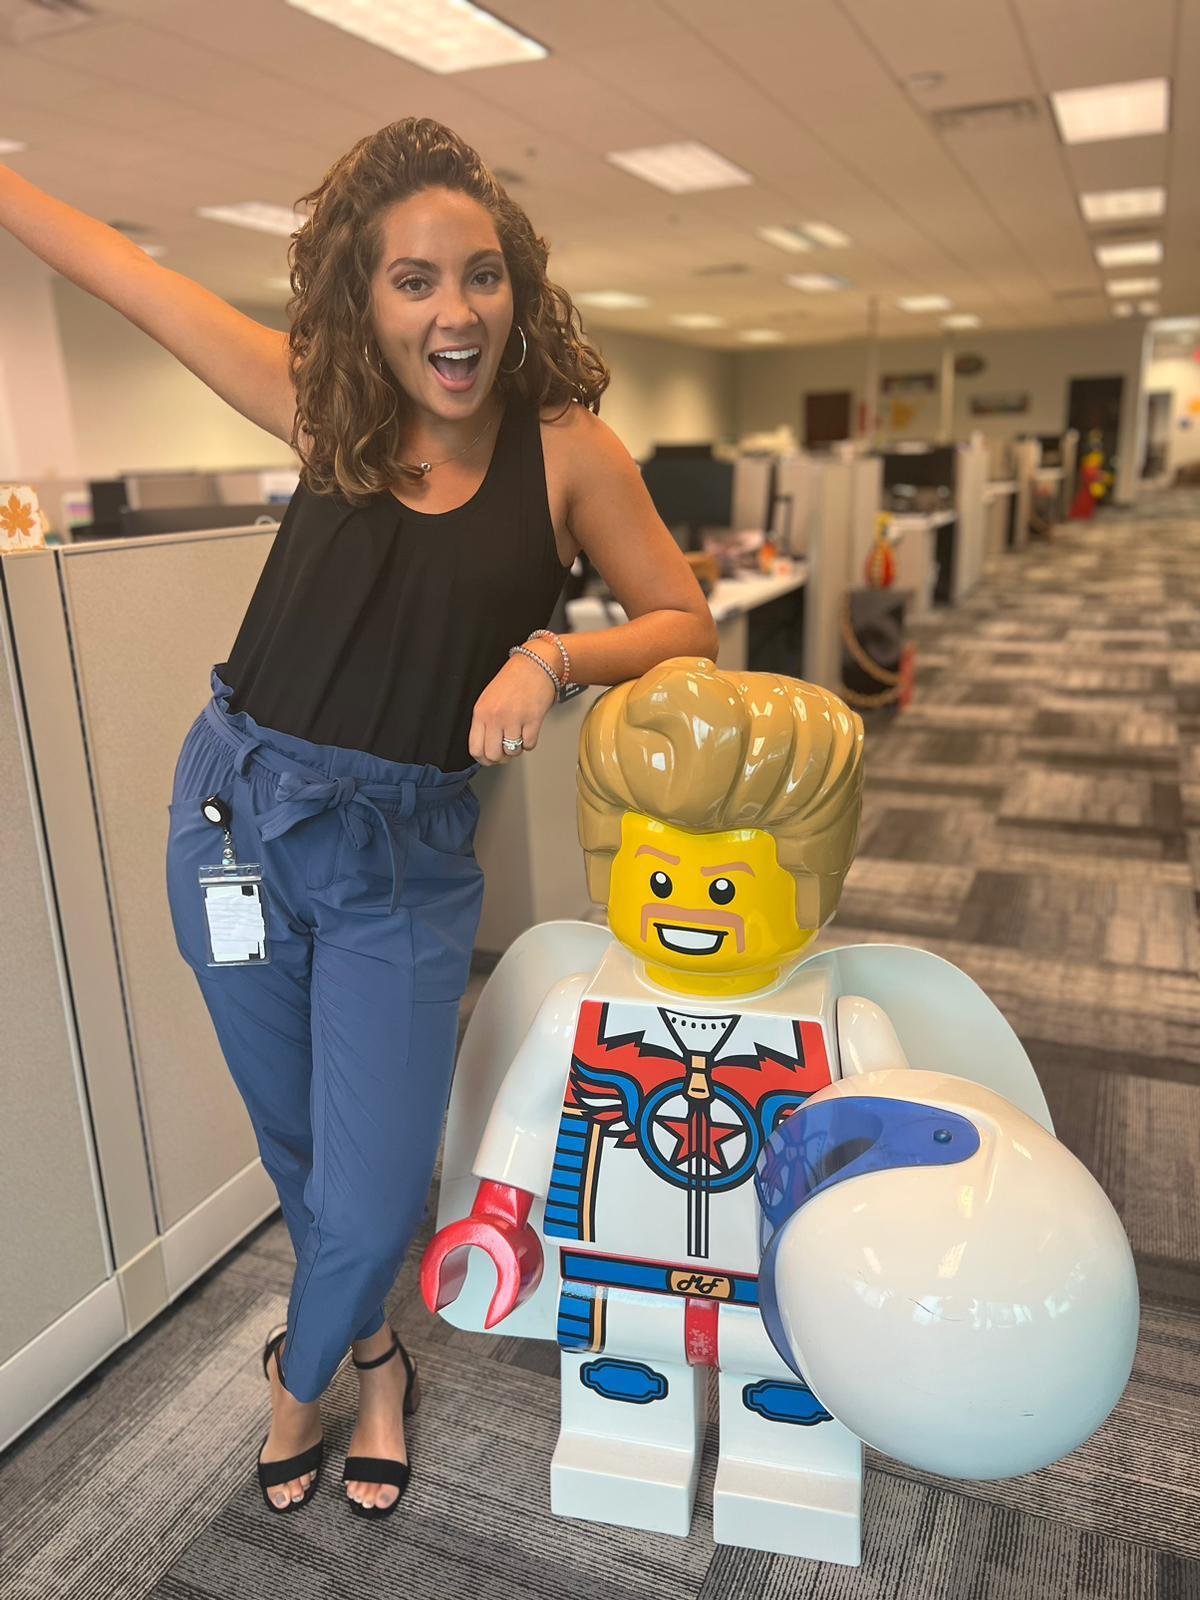 Noelle posing next to a lego figurine